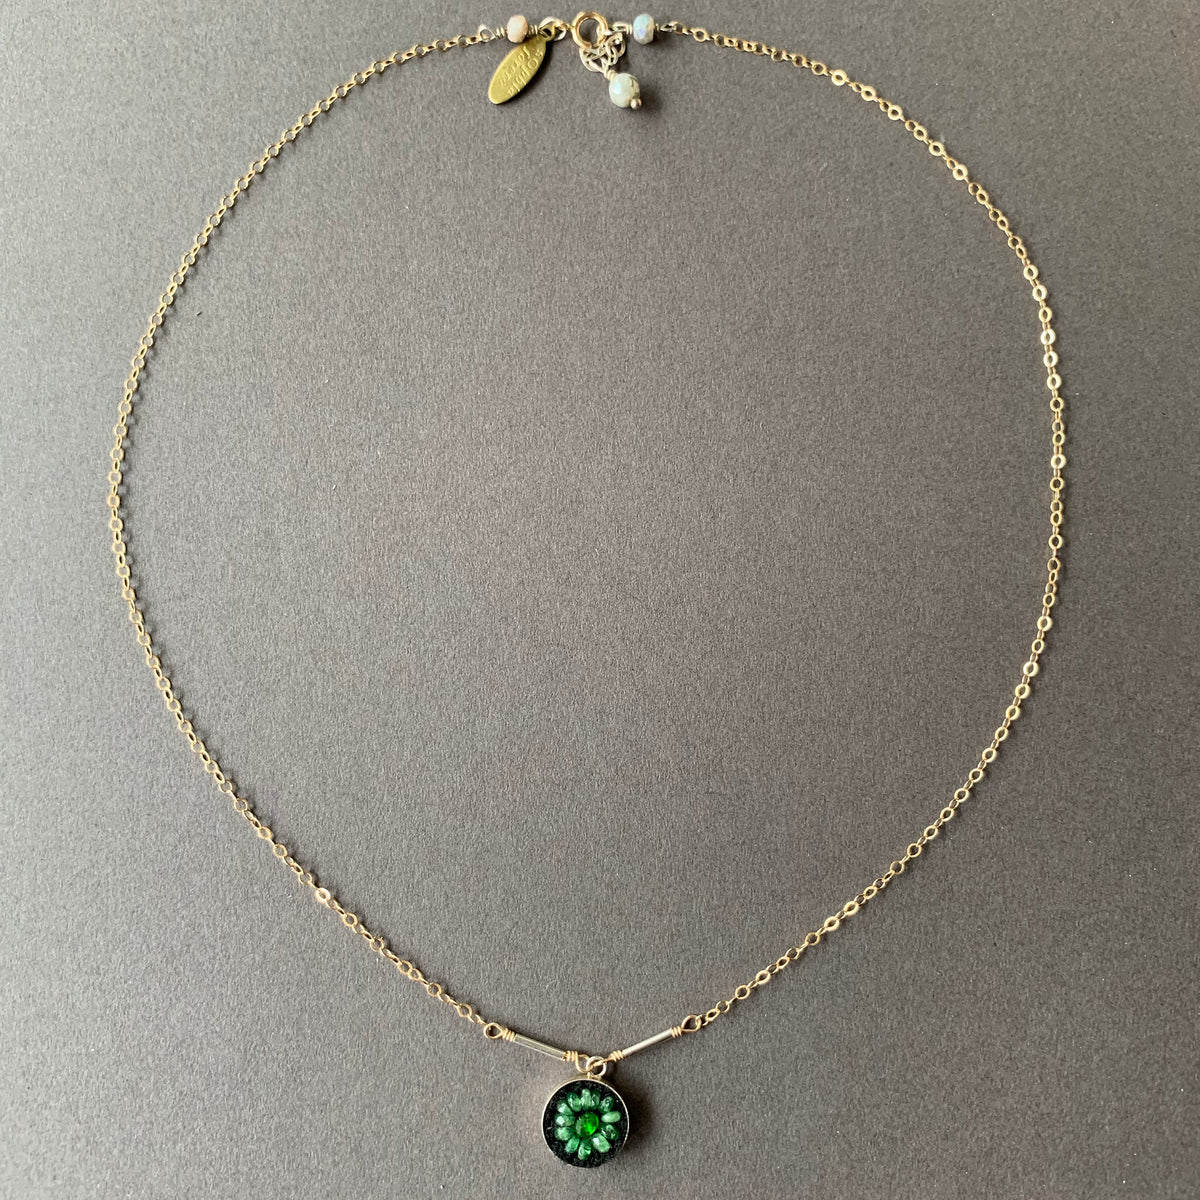 Emerald Mosaic on Gold necklace